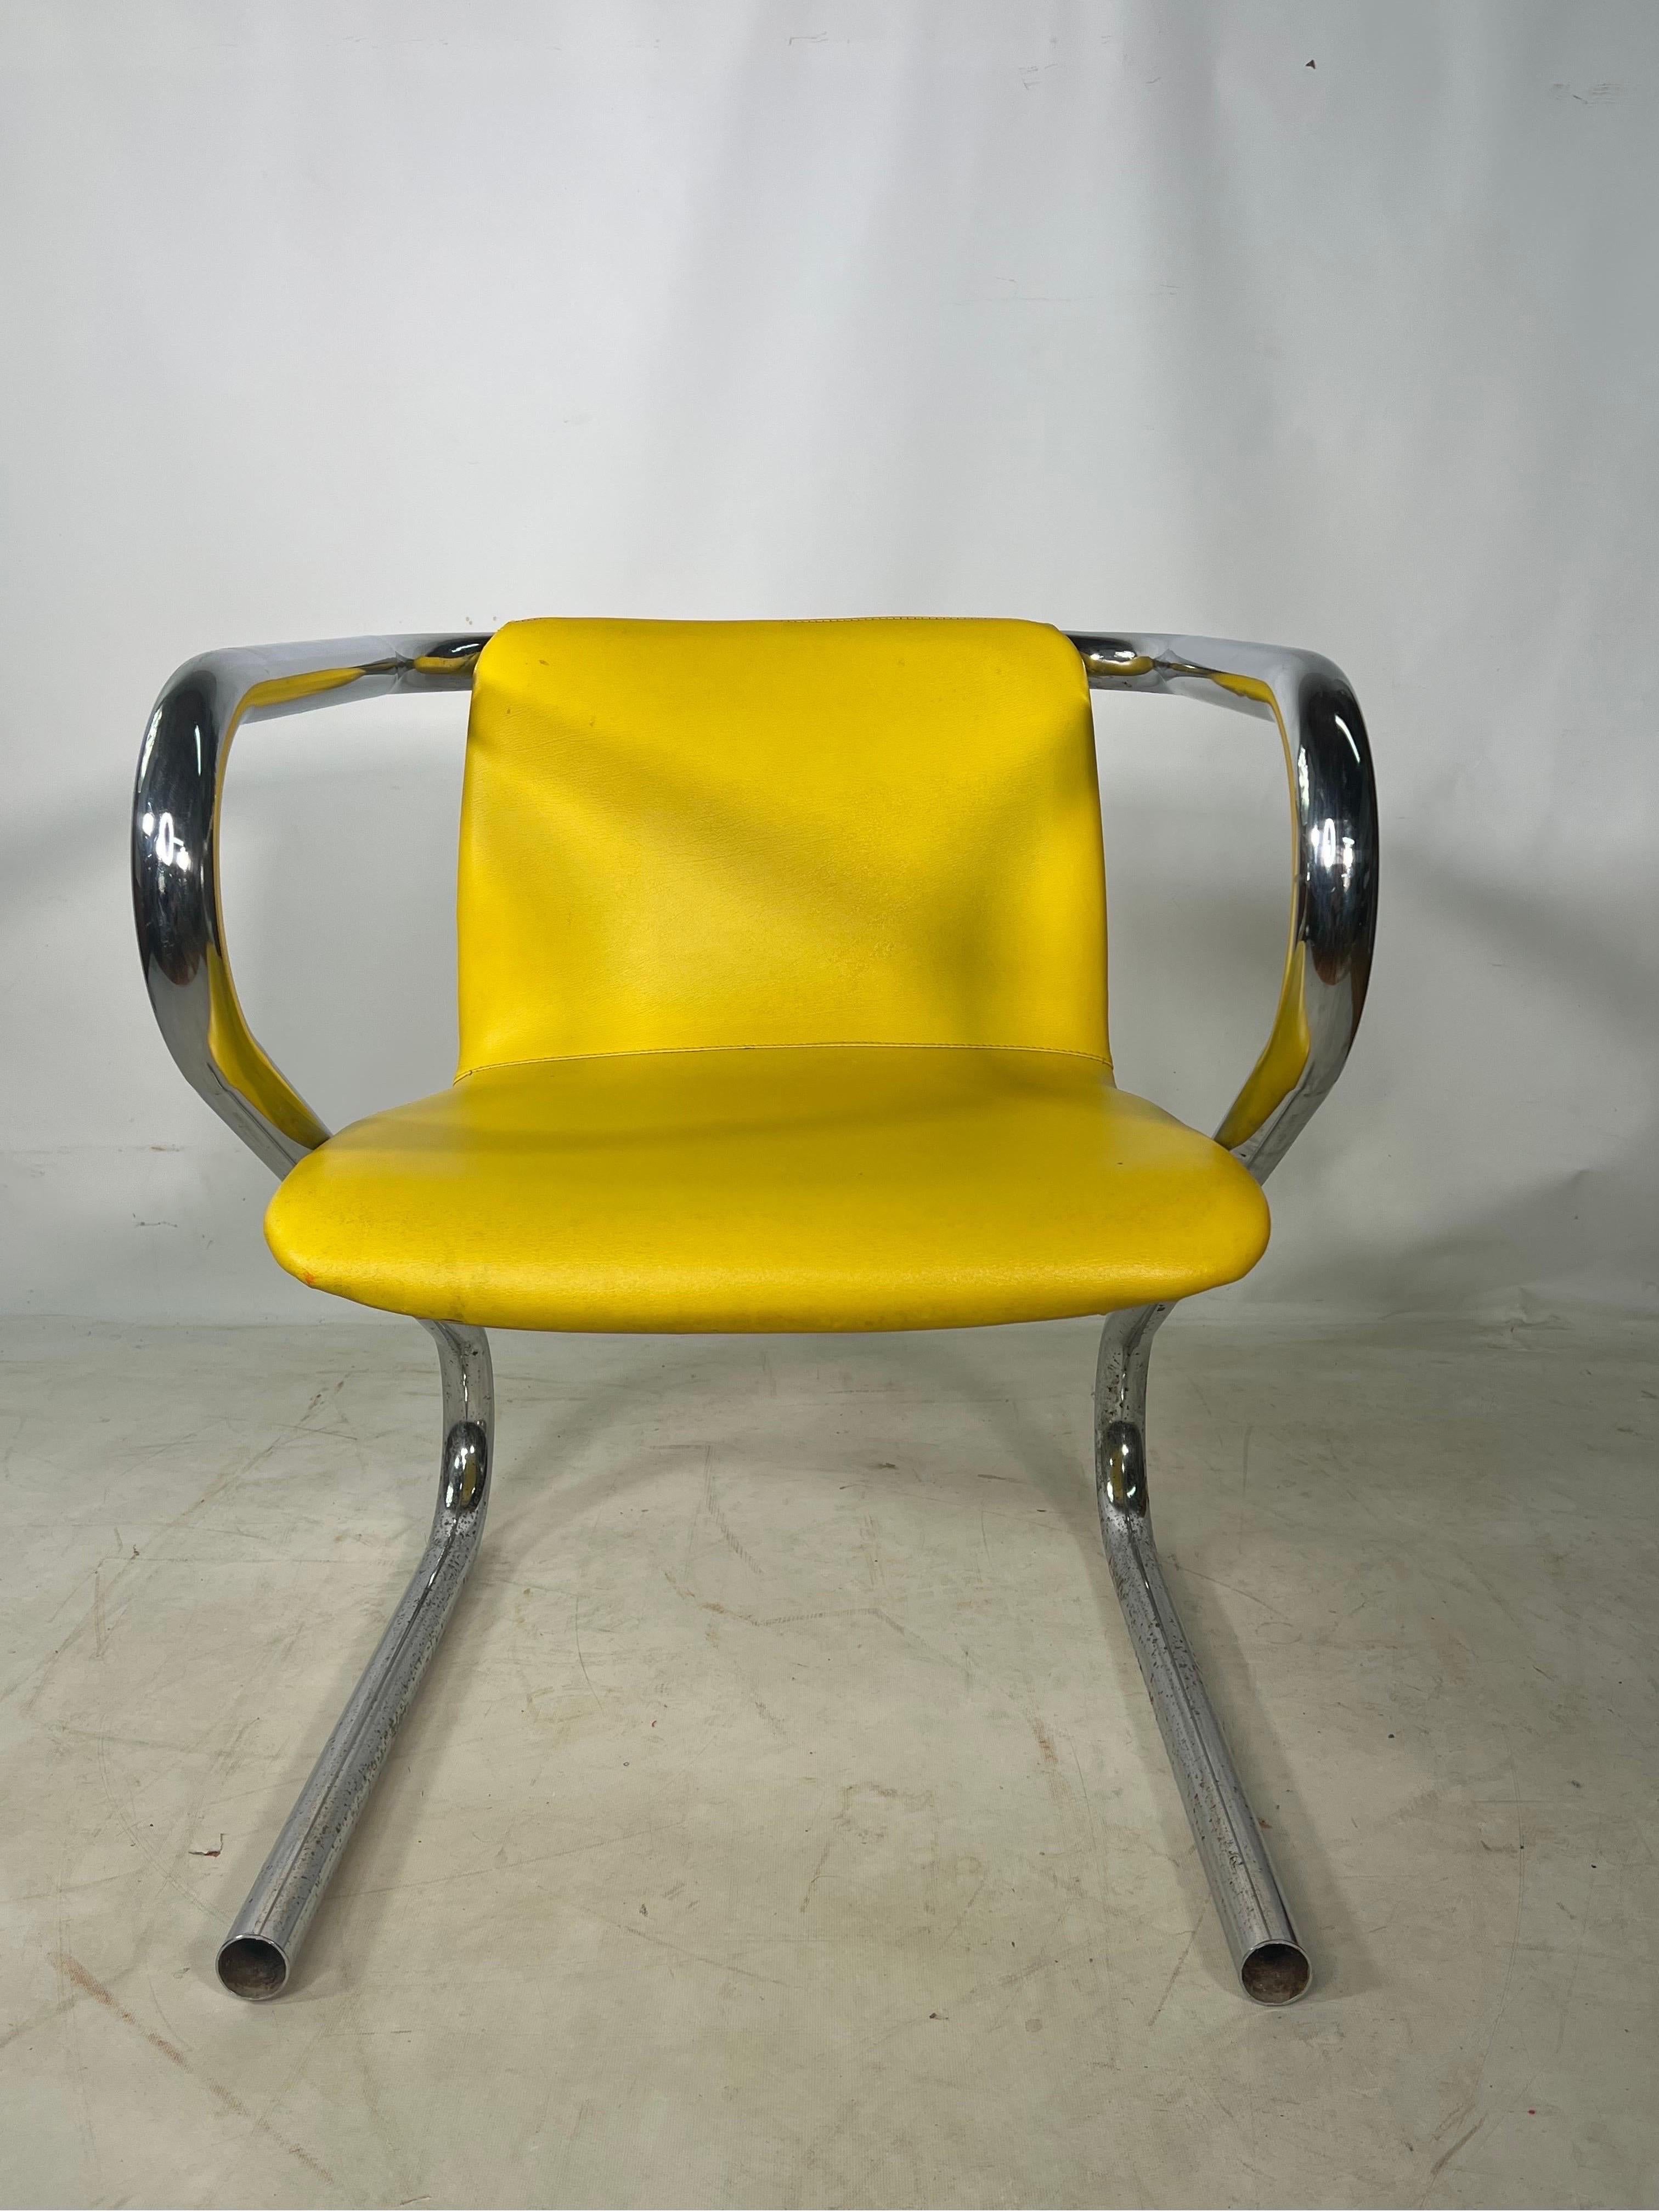 1970s Tubular chrome yellow dining chair. We have 36 chairs available and each chair is 225.00. The chairs are made by Kinetics furniture inc.